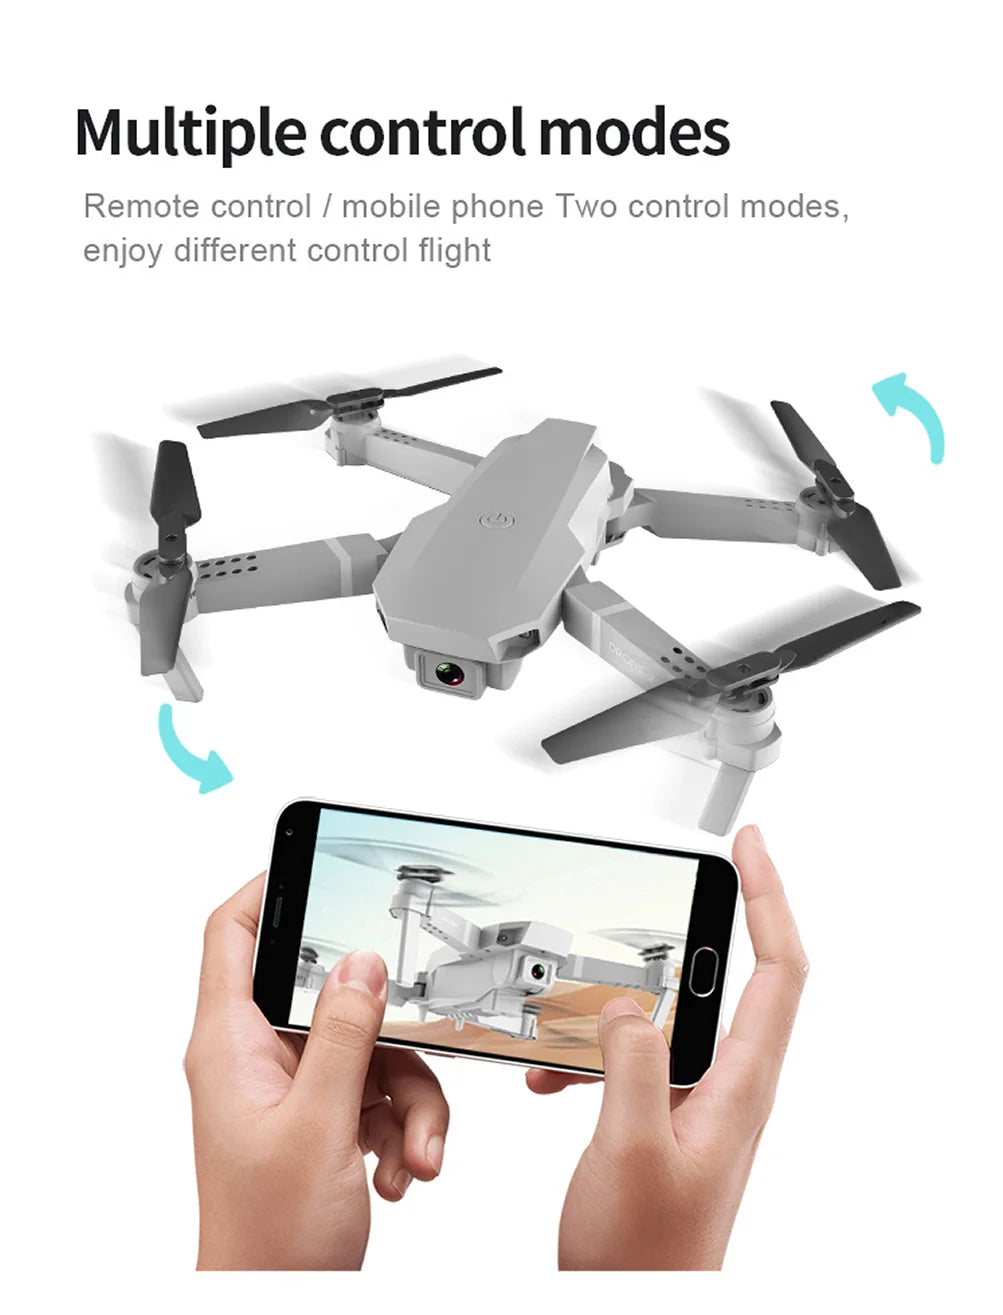 E59 Drone, multiple control modes remote control mobile phone two control modes, enjoy different control